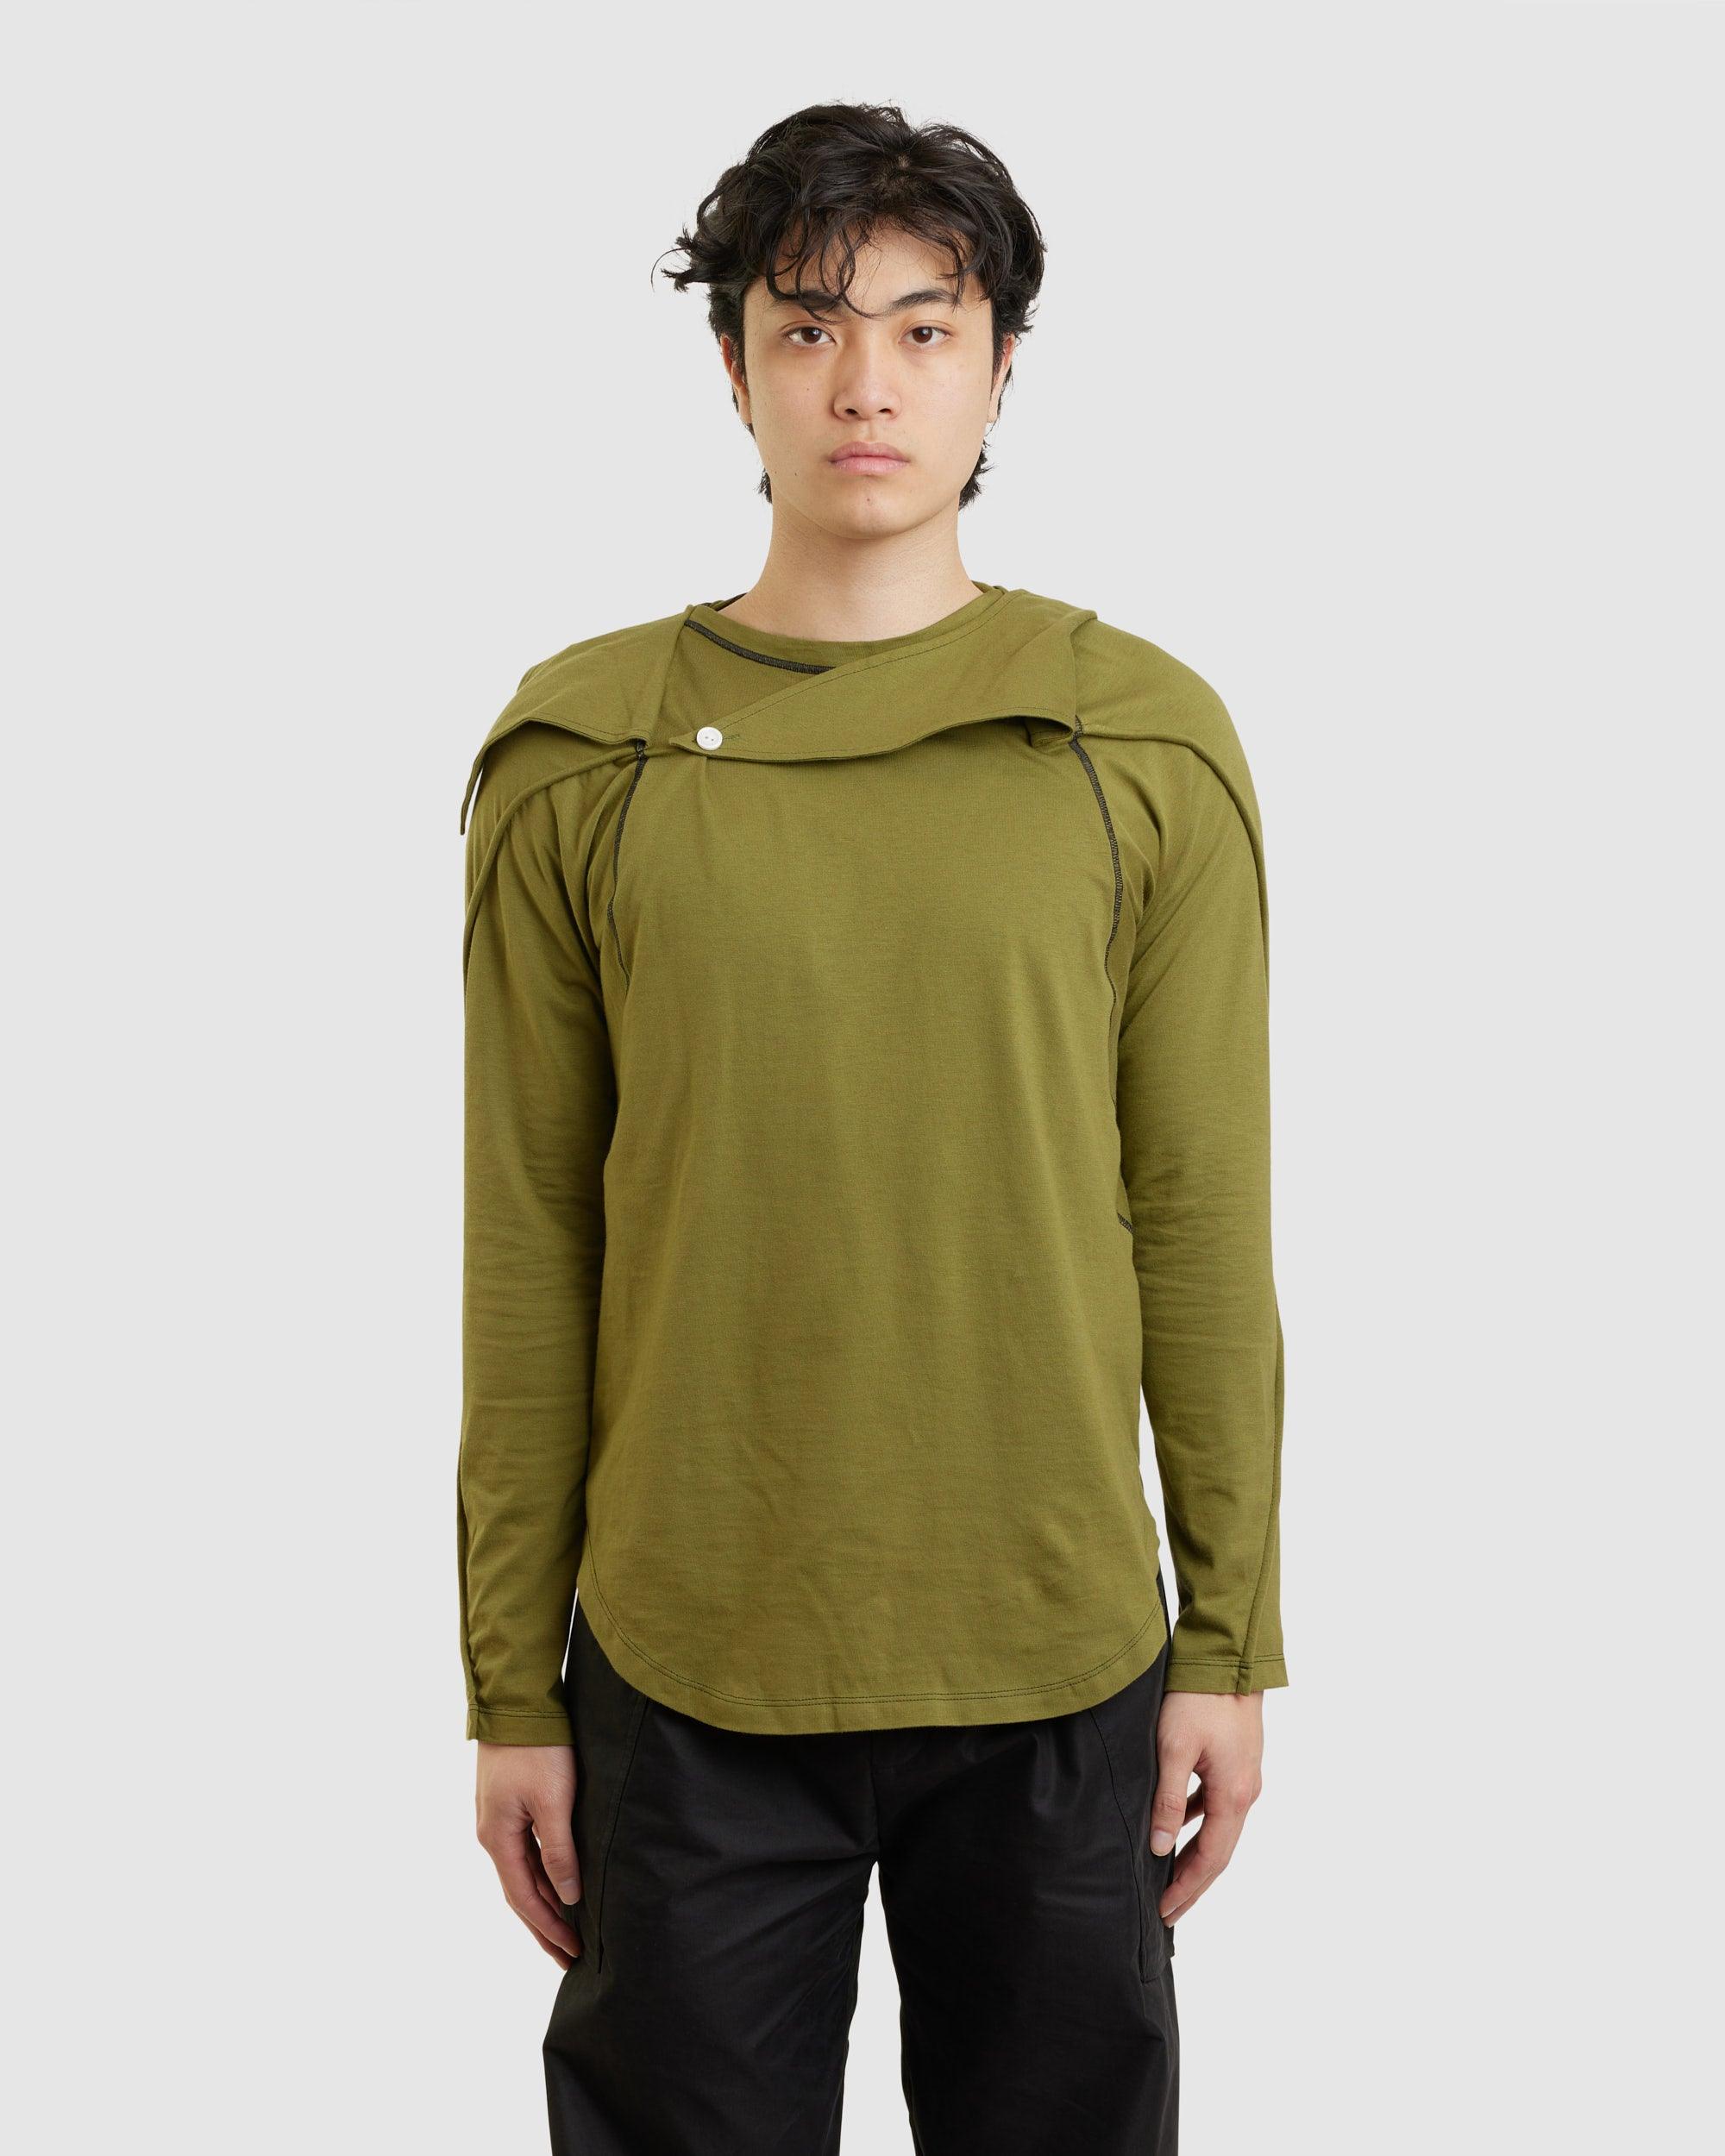 Solon Hooded Top